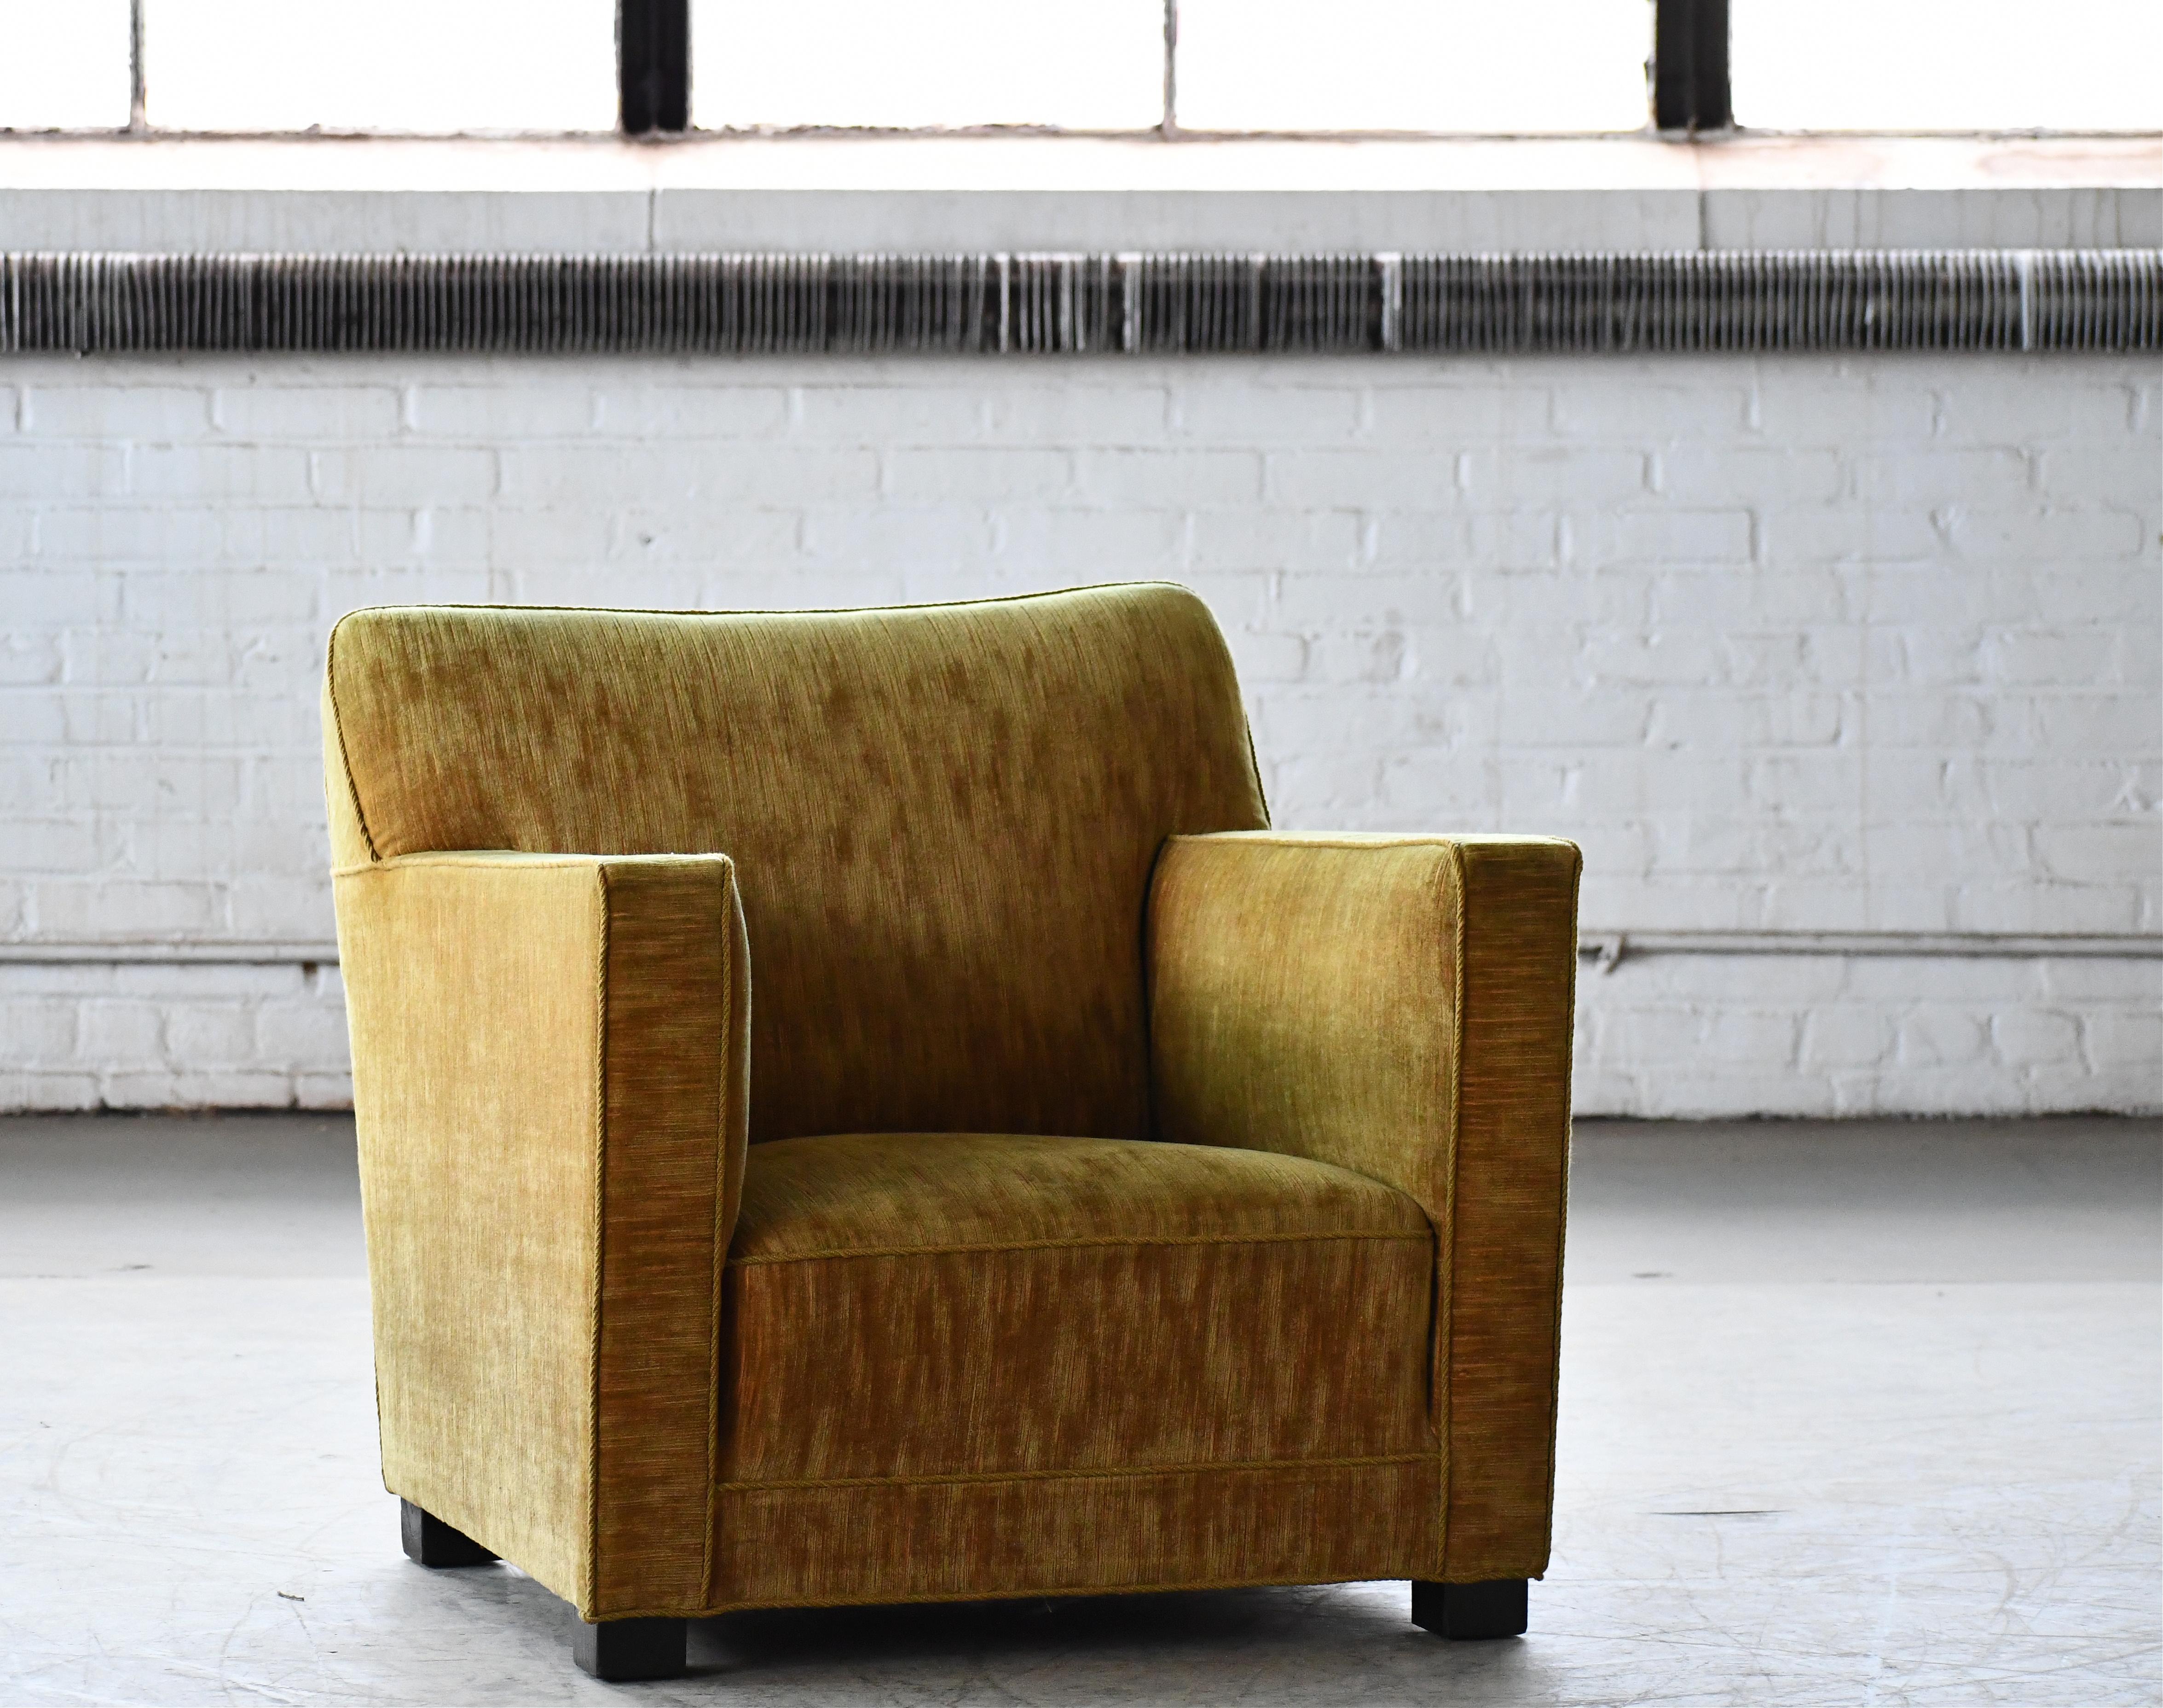 Mid-20th Century Danish Art Deco Midcentury Low Lounge or Club Chair in Gold Mohair, 1940s